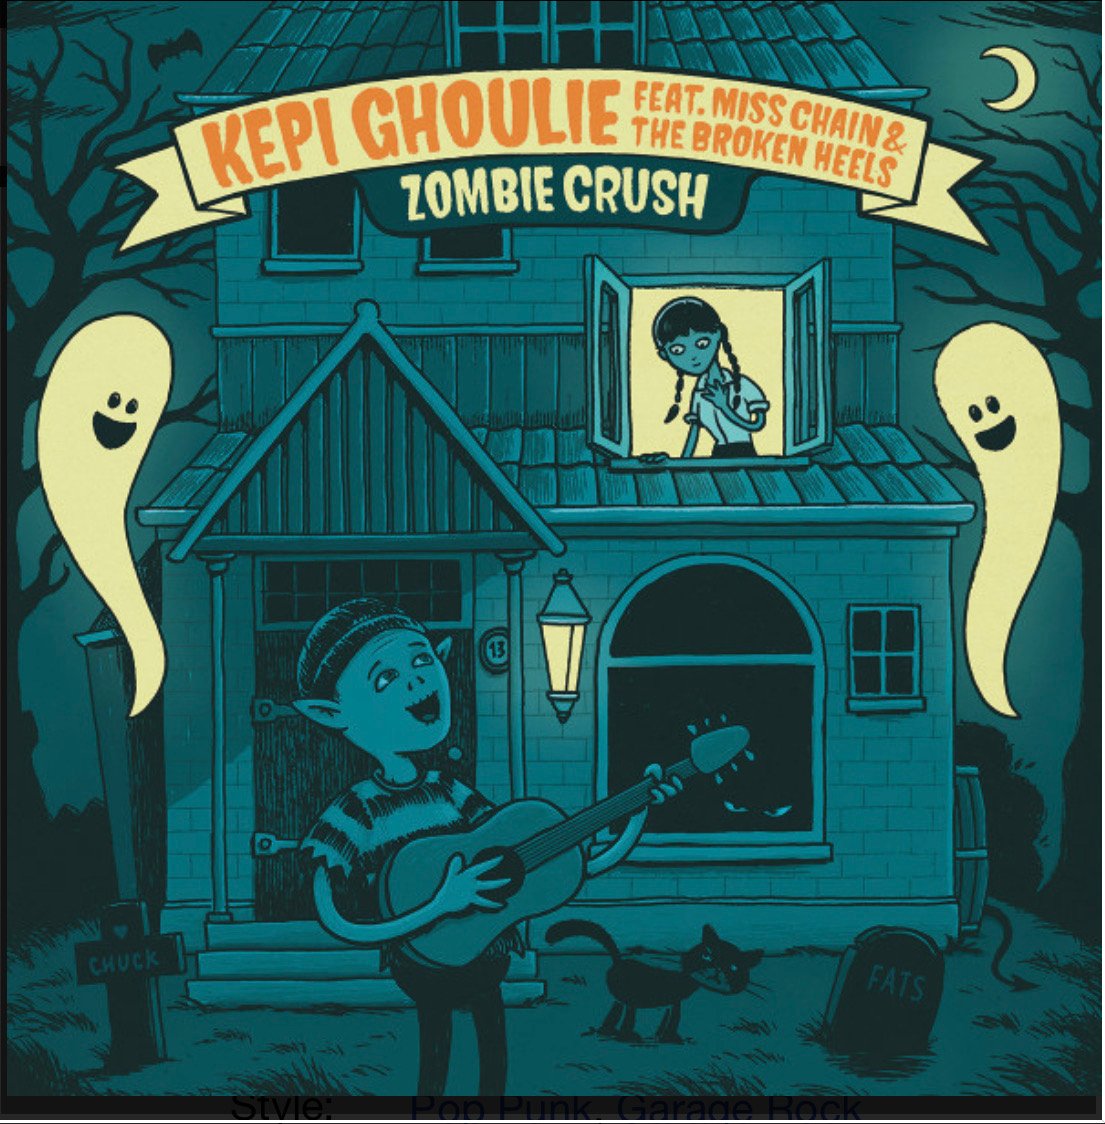 Image of Kepi Ghoulie feat. Miss Chain & The Broken Heels – Zombie Crush 7”